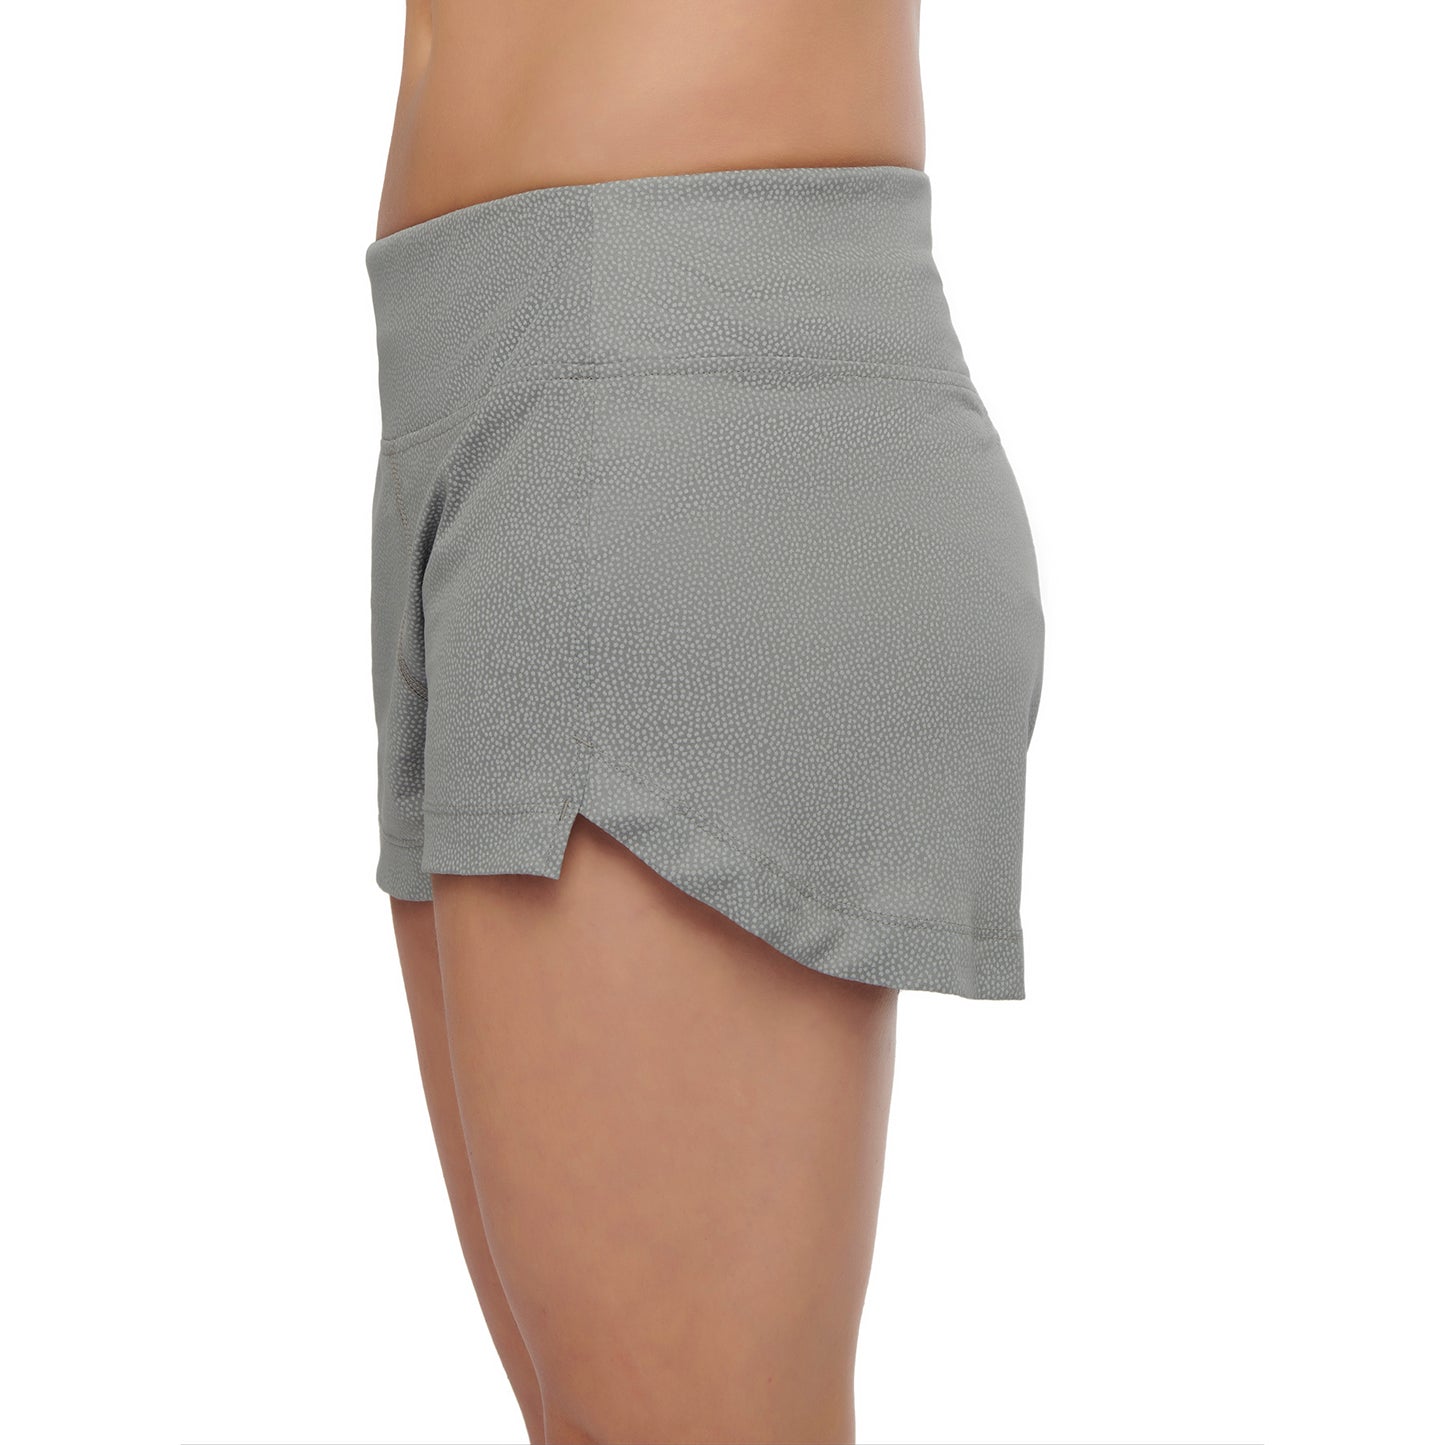 Muscle recovery sleep shorts women || Silver